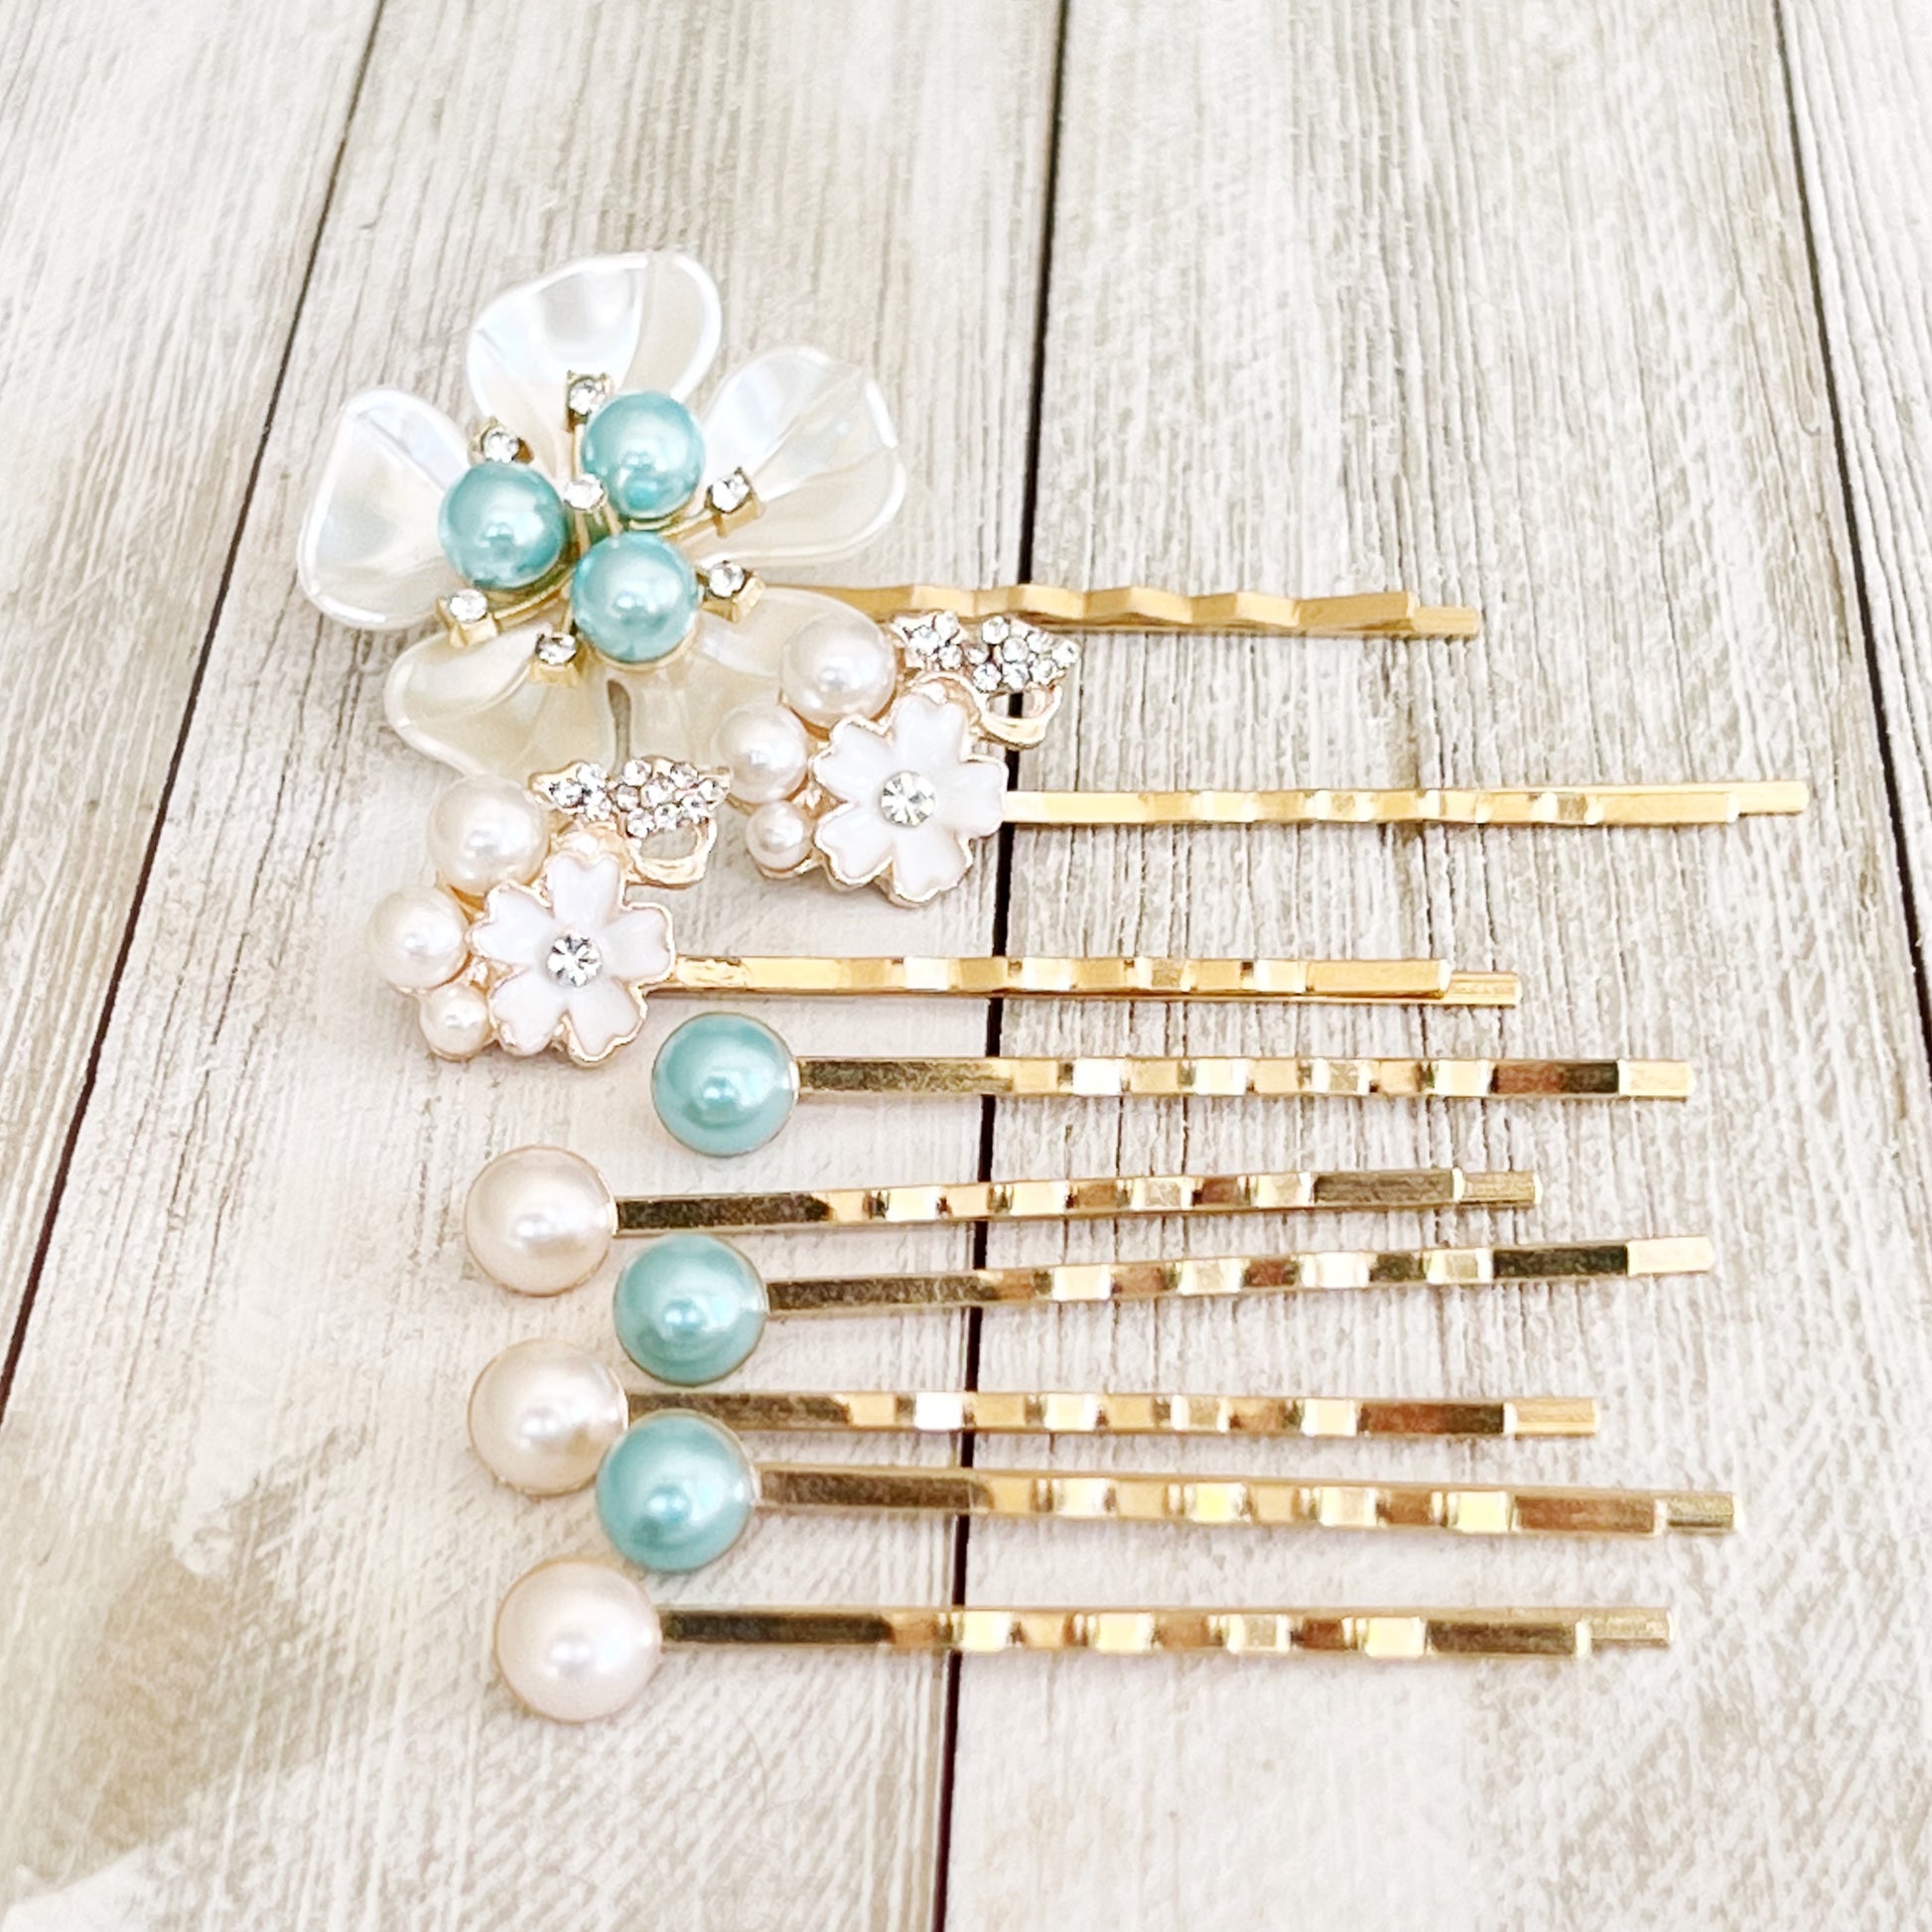 Blue Pearl Hair Pins Set - Wedding Hair Jewelry for Bride | White Floral & Rhinestone Bobby Pins for Elegant Hairstyles